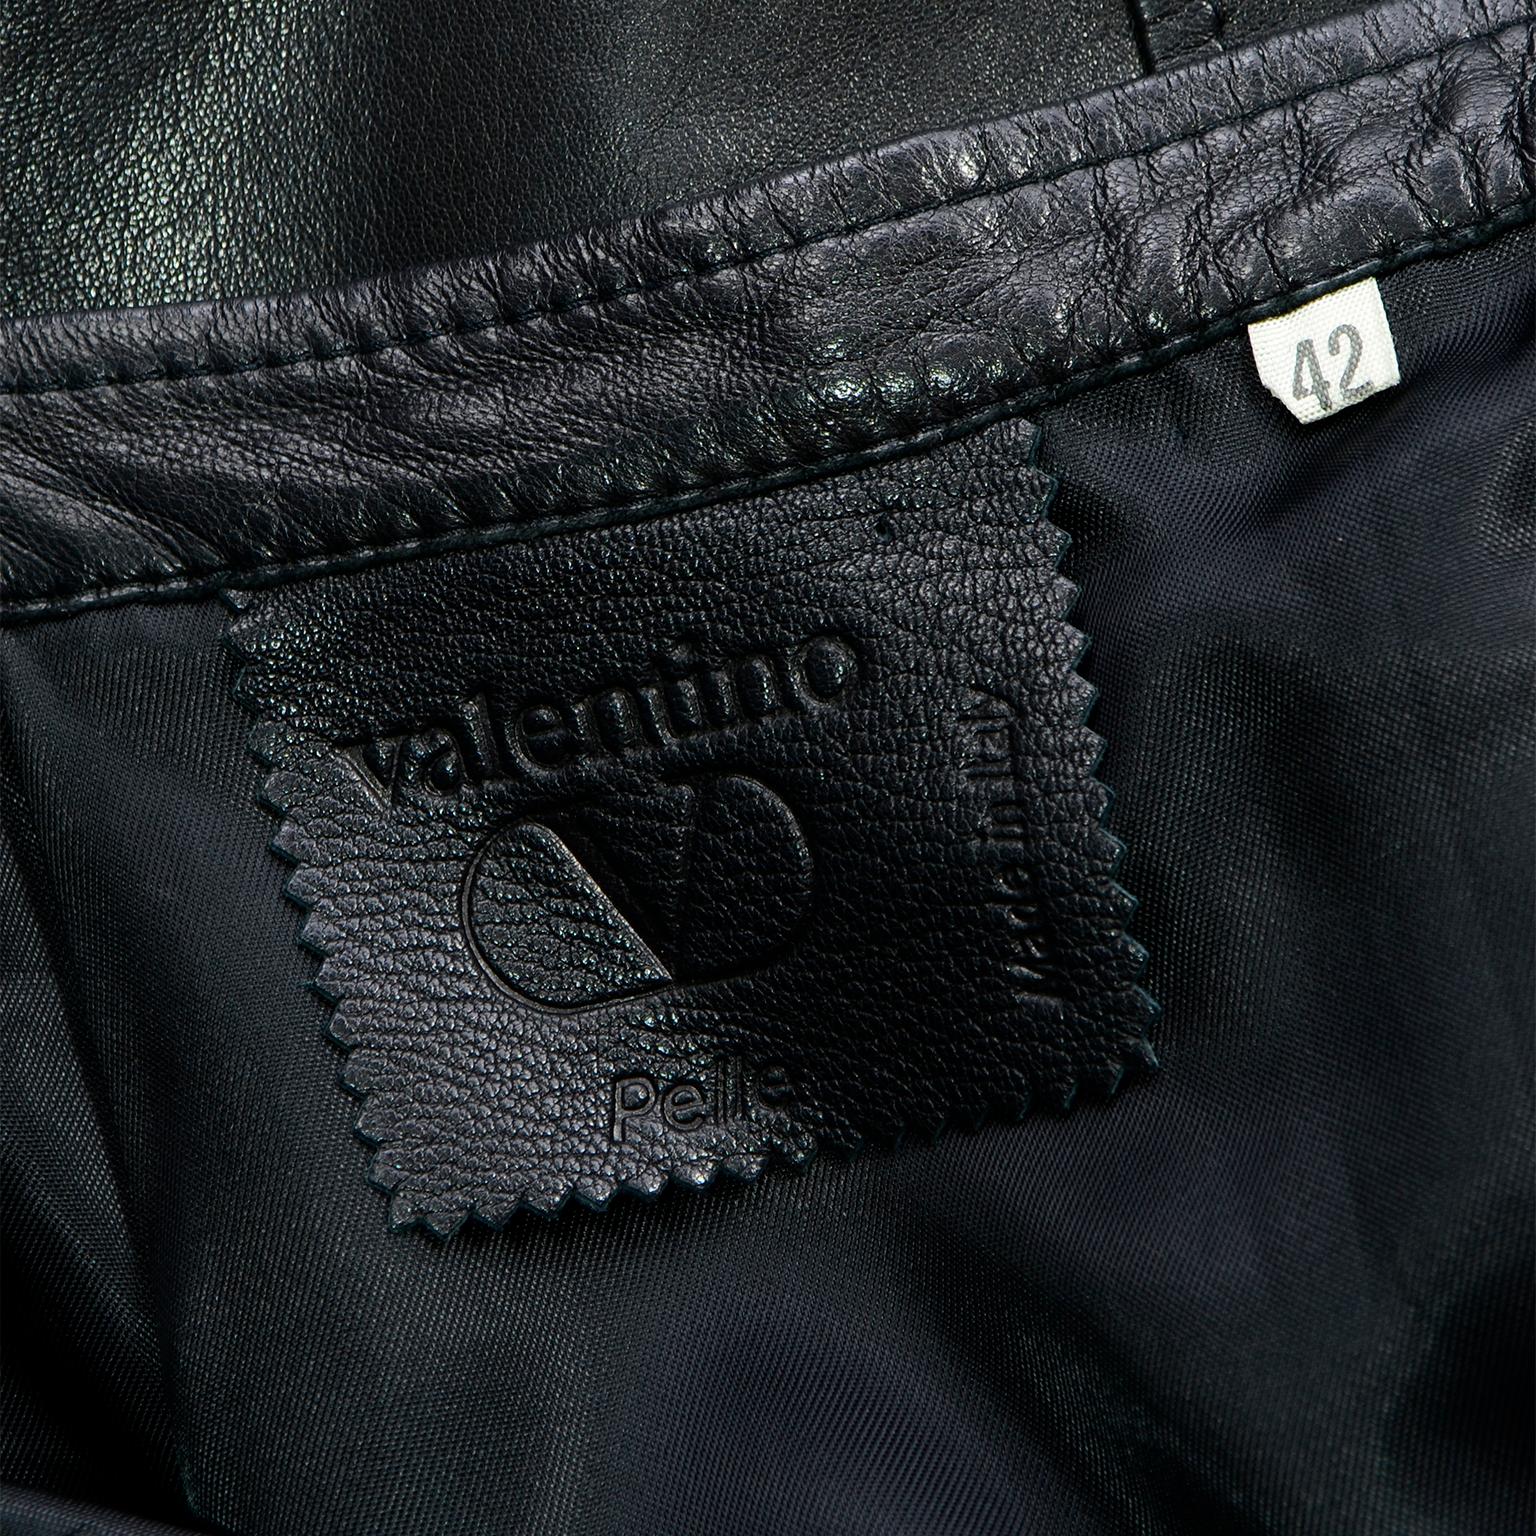 Valentino Made in Italy Black Leather Pencil Skirt w Unique Button Detail 2